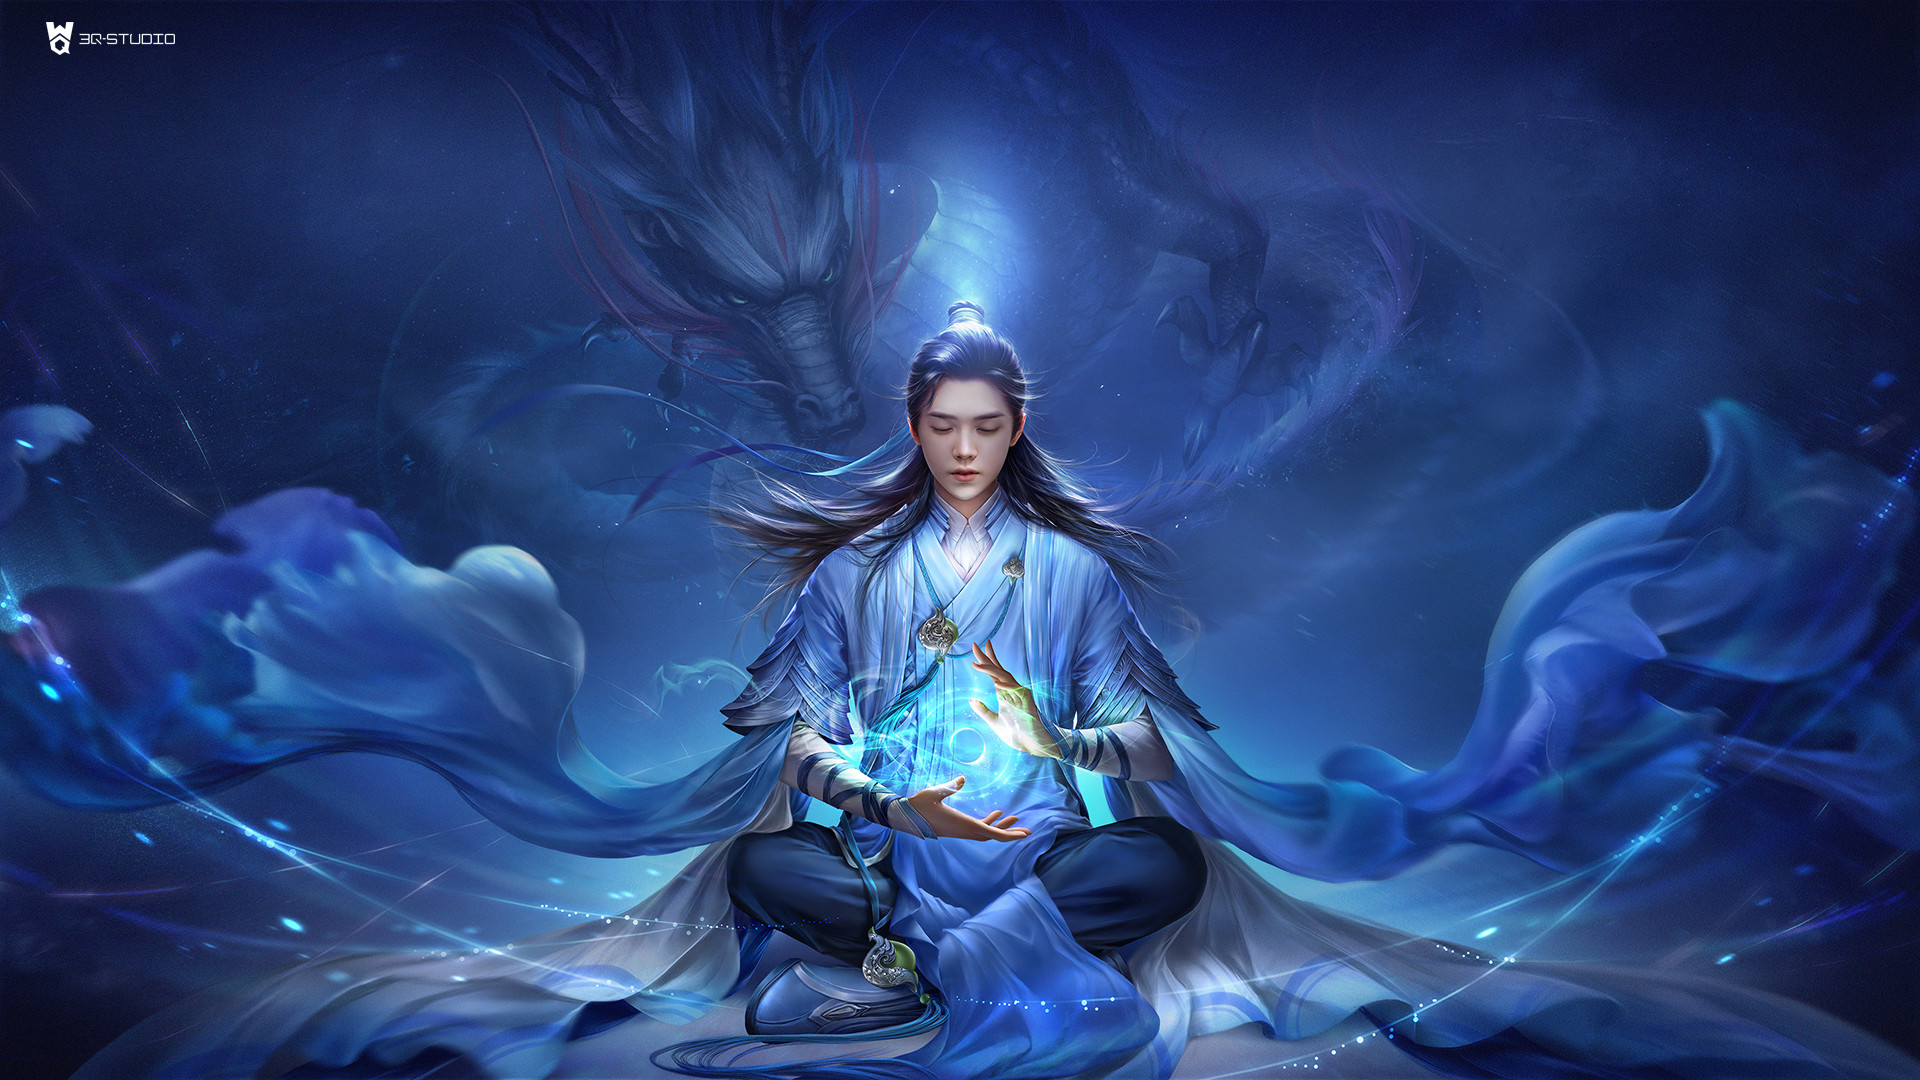 General 1920x1080 3Q Studio drawing men dark hair long hair ponytail magician spell blue clothing Chinese dragon monks Serenity frontal view